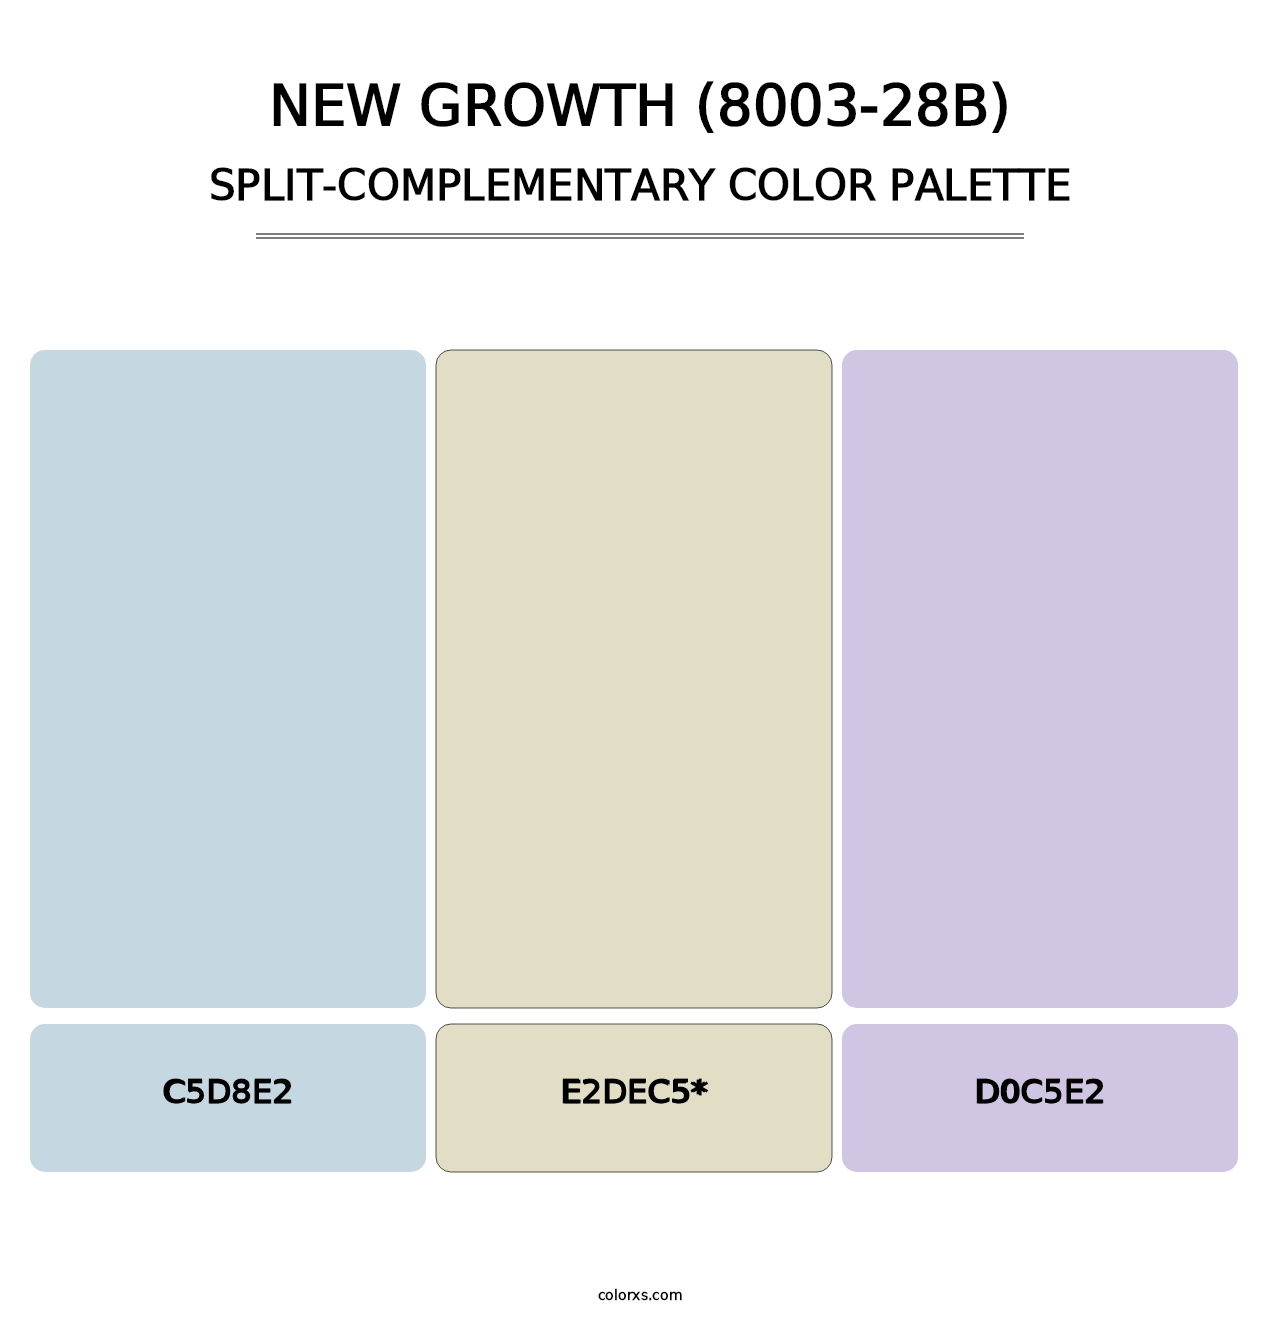 New Growth (8003-28B) - Split-Complementary Color Palette